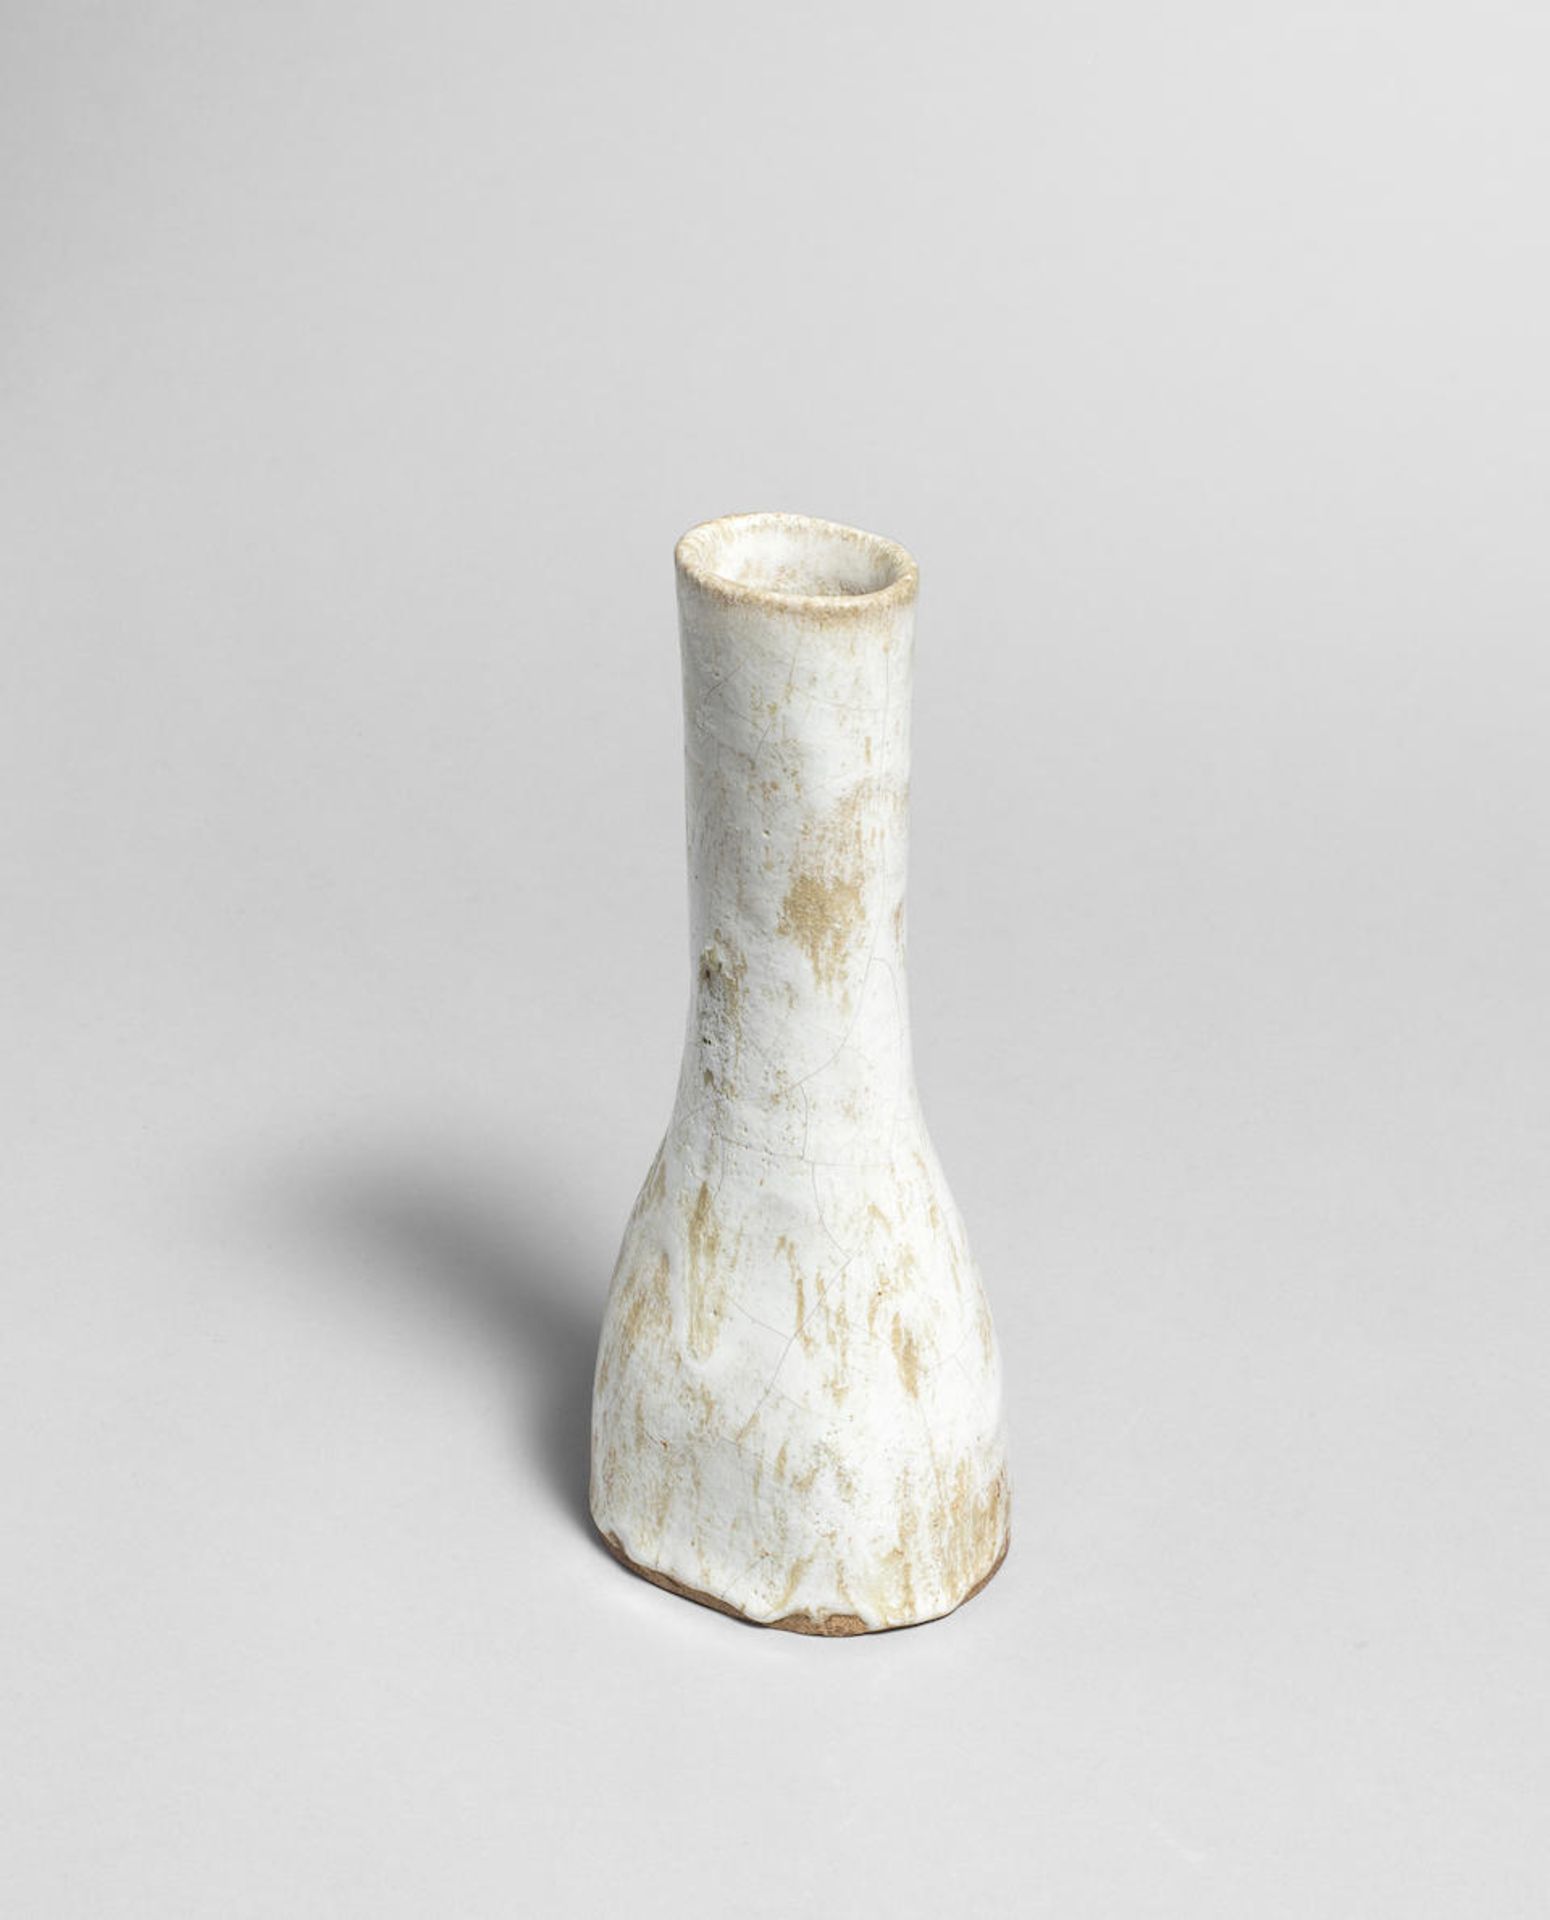 Lucie Rie Tall vase, circa 1978 - Image 3 of 3